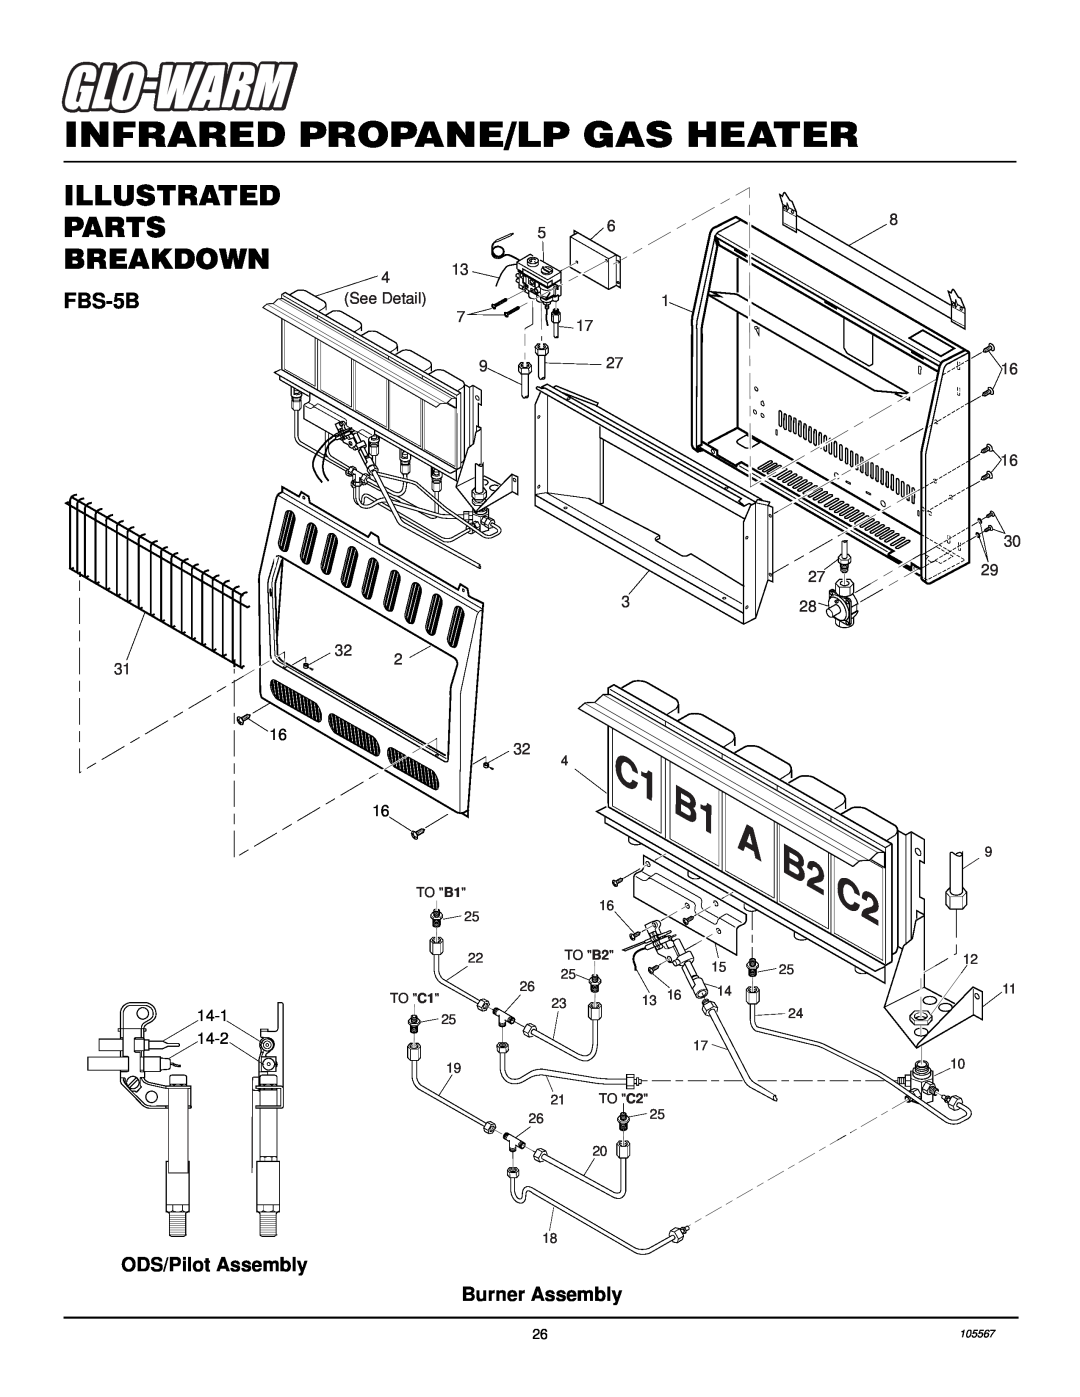 Desa FB-3B FBS-5B, Infrared Propane/Lp Gas Heater, Illustrated Parts Breakdown, ODS/Pilot Assembly, Burner Assembly, TO B1 